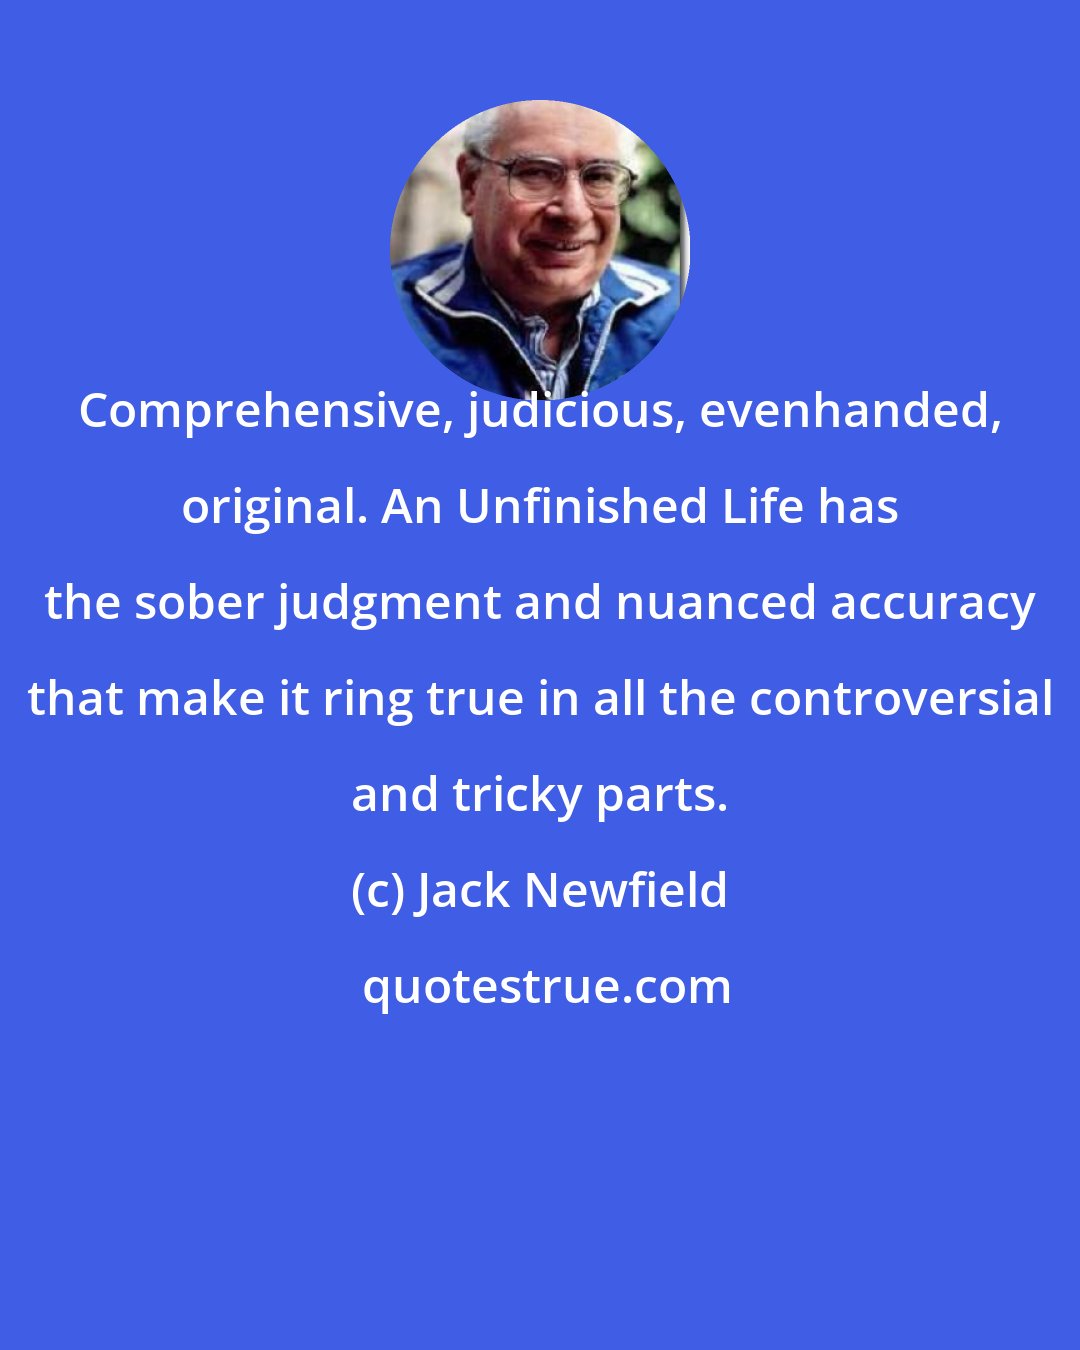 Jack Newfield: Comprehensive, judicious, evenhanded, original. An Unfinished Life has the sober judgment and nuanced accuracy that make it ring true in all the controversial and tricky parts.